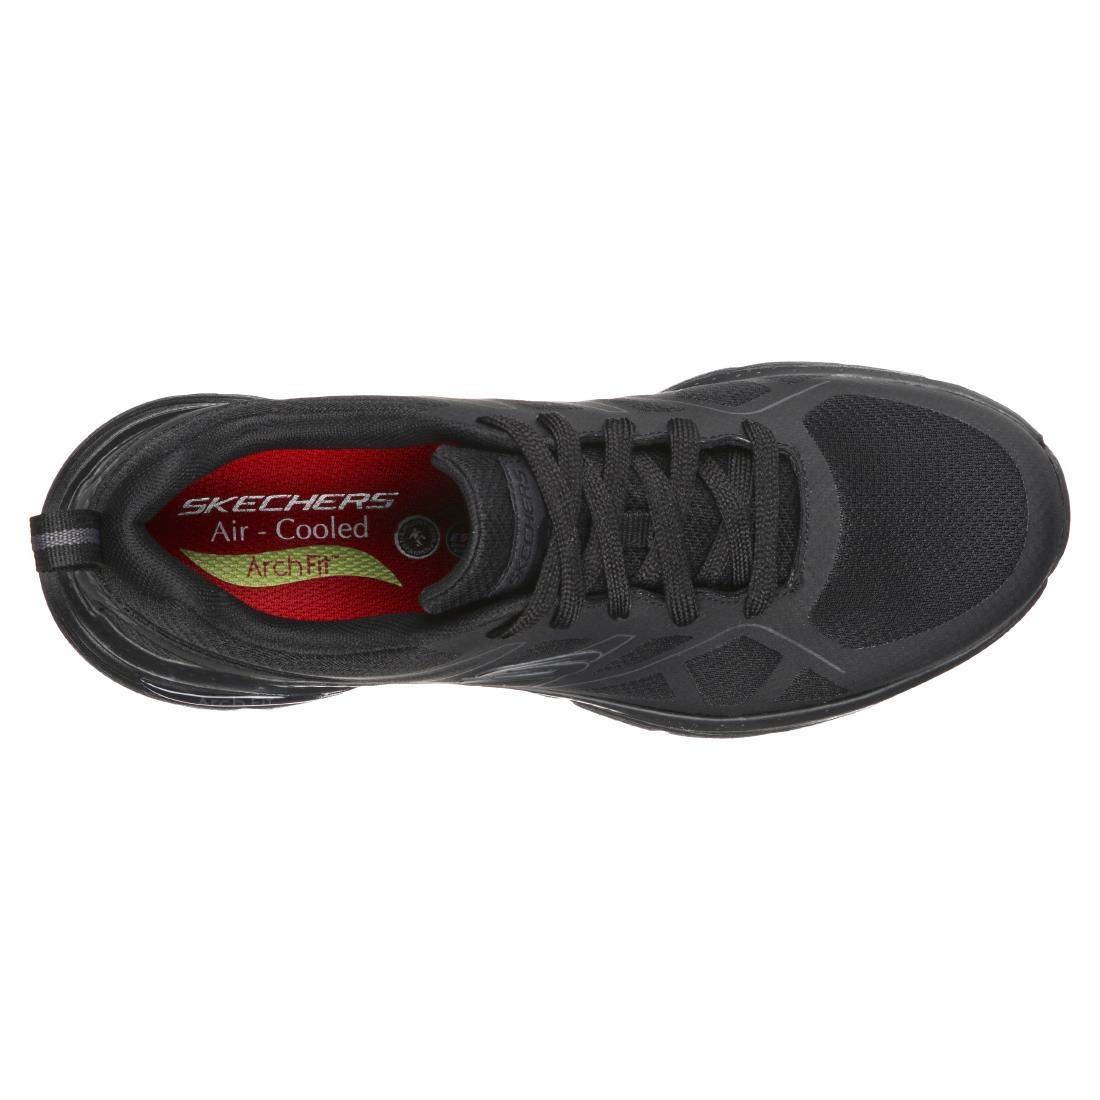 Skechers Axtell Slip Resistant Arch Fit Trainer Size 43 - BB673-43  - 4